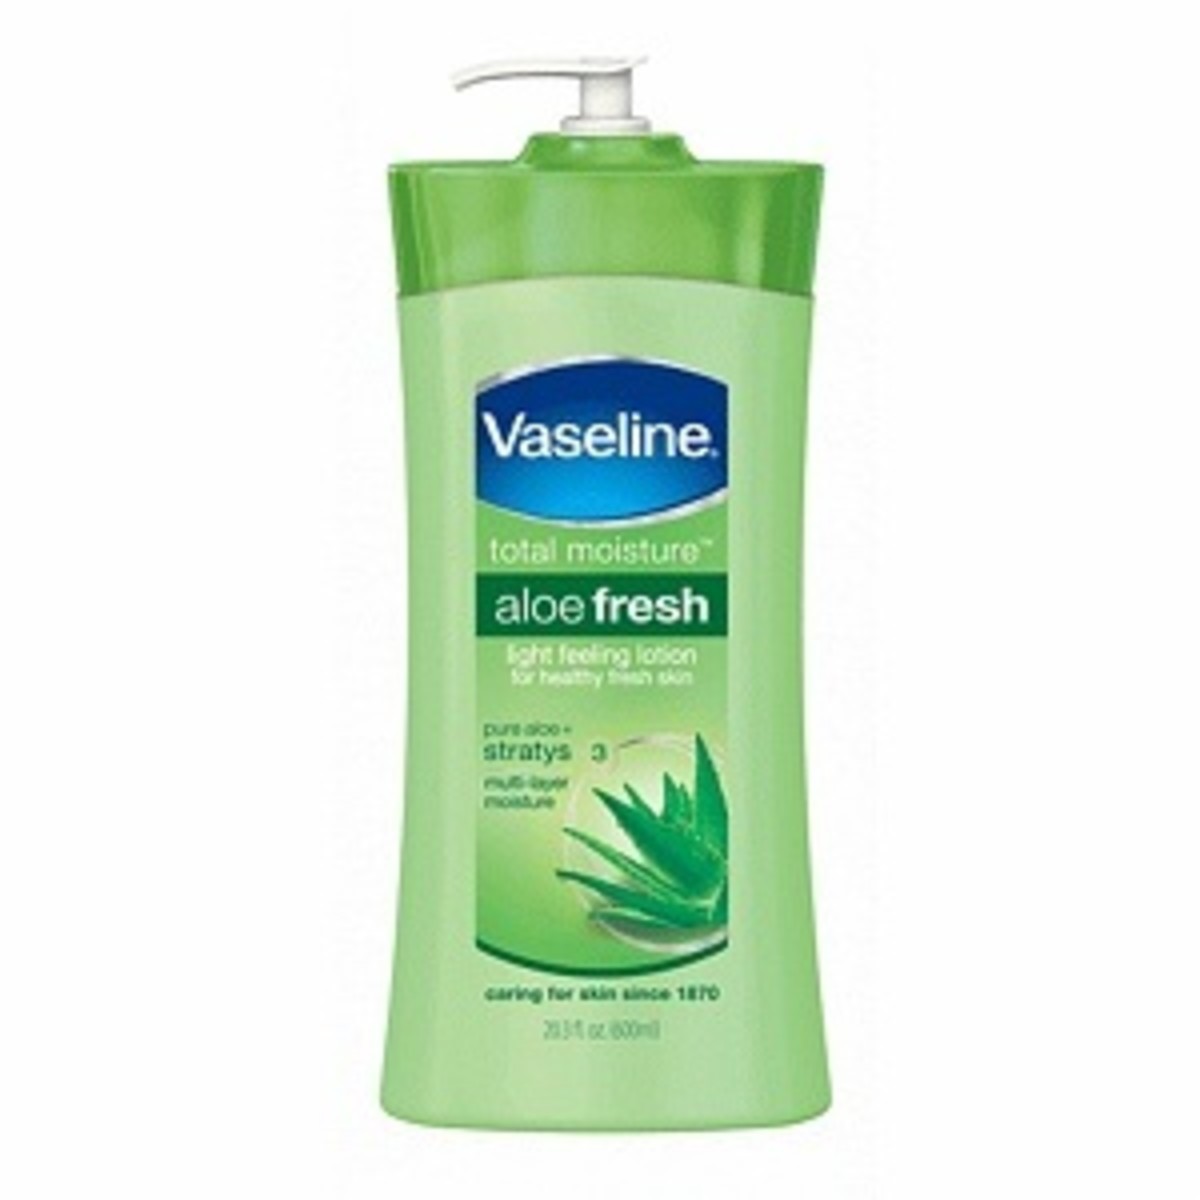 Is Vaseline good for your skin?